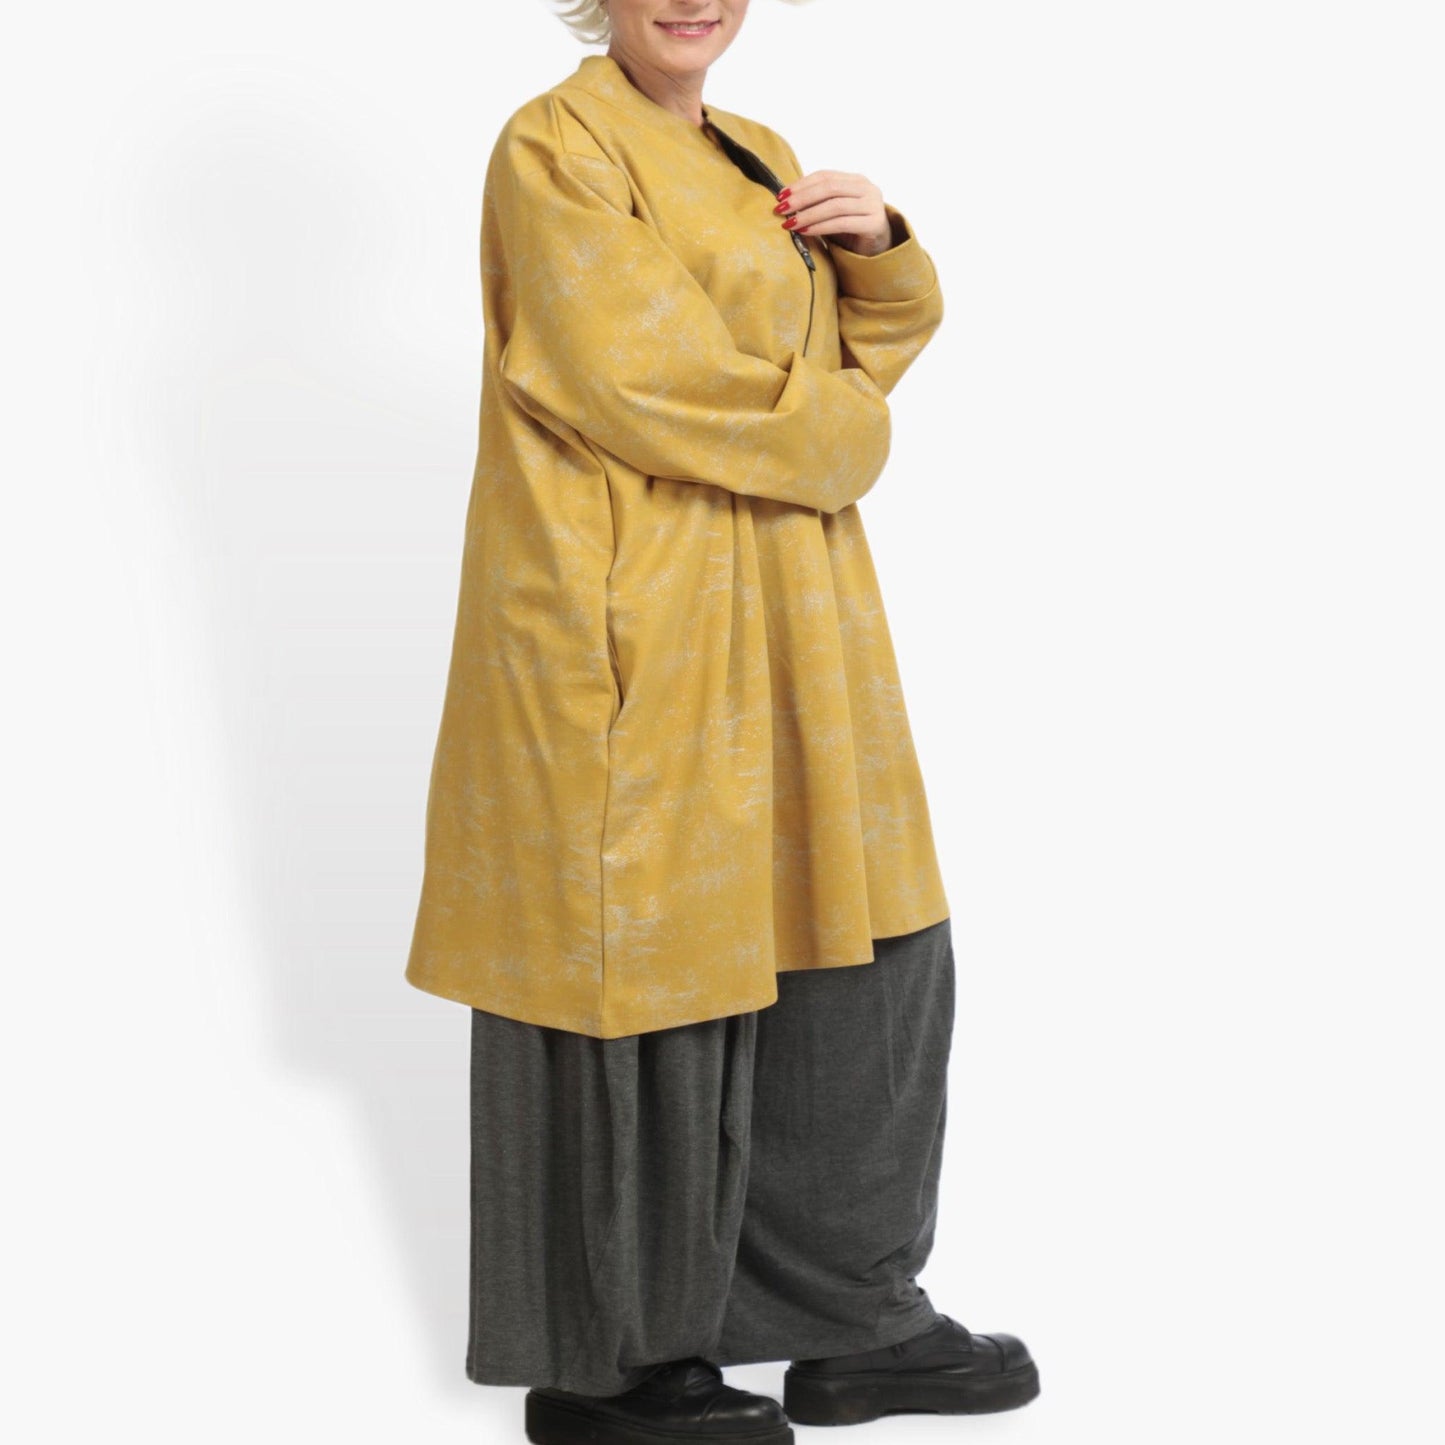 Winter big shirt in a boxy shape made of Romanit jersey quality, Lilo in mustard